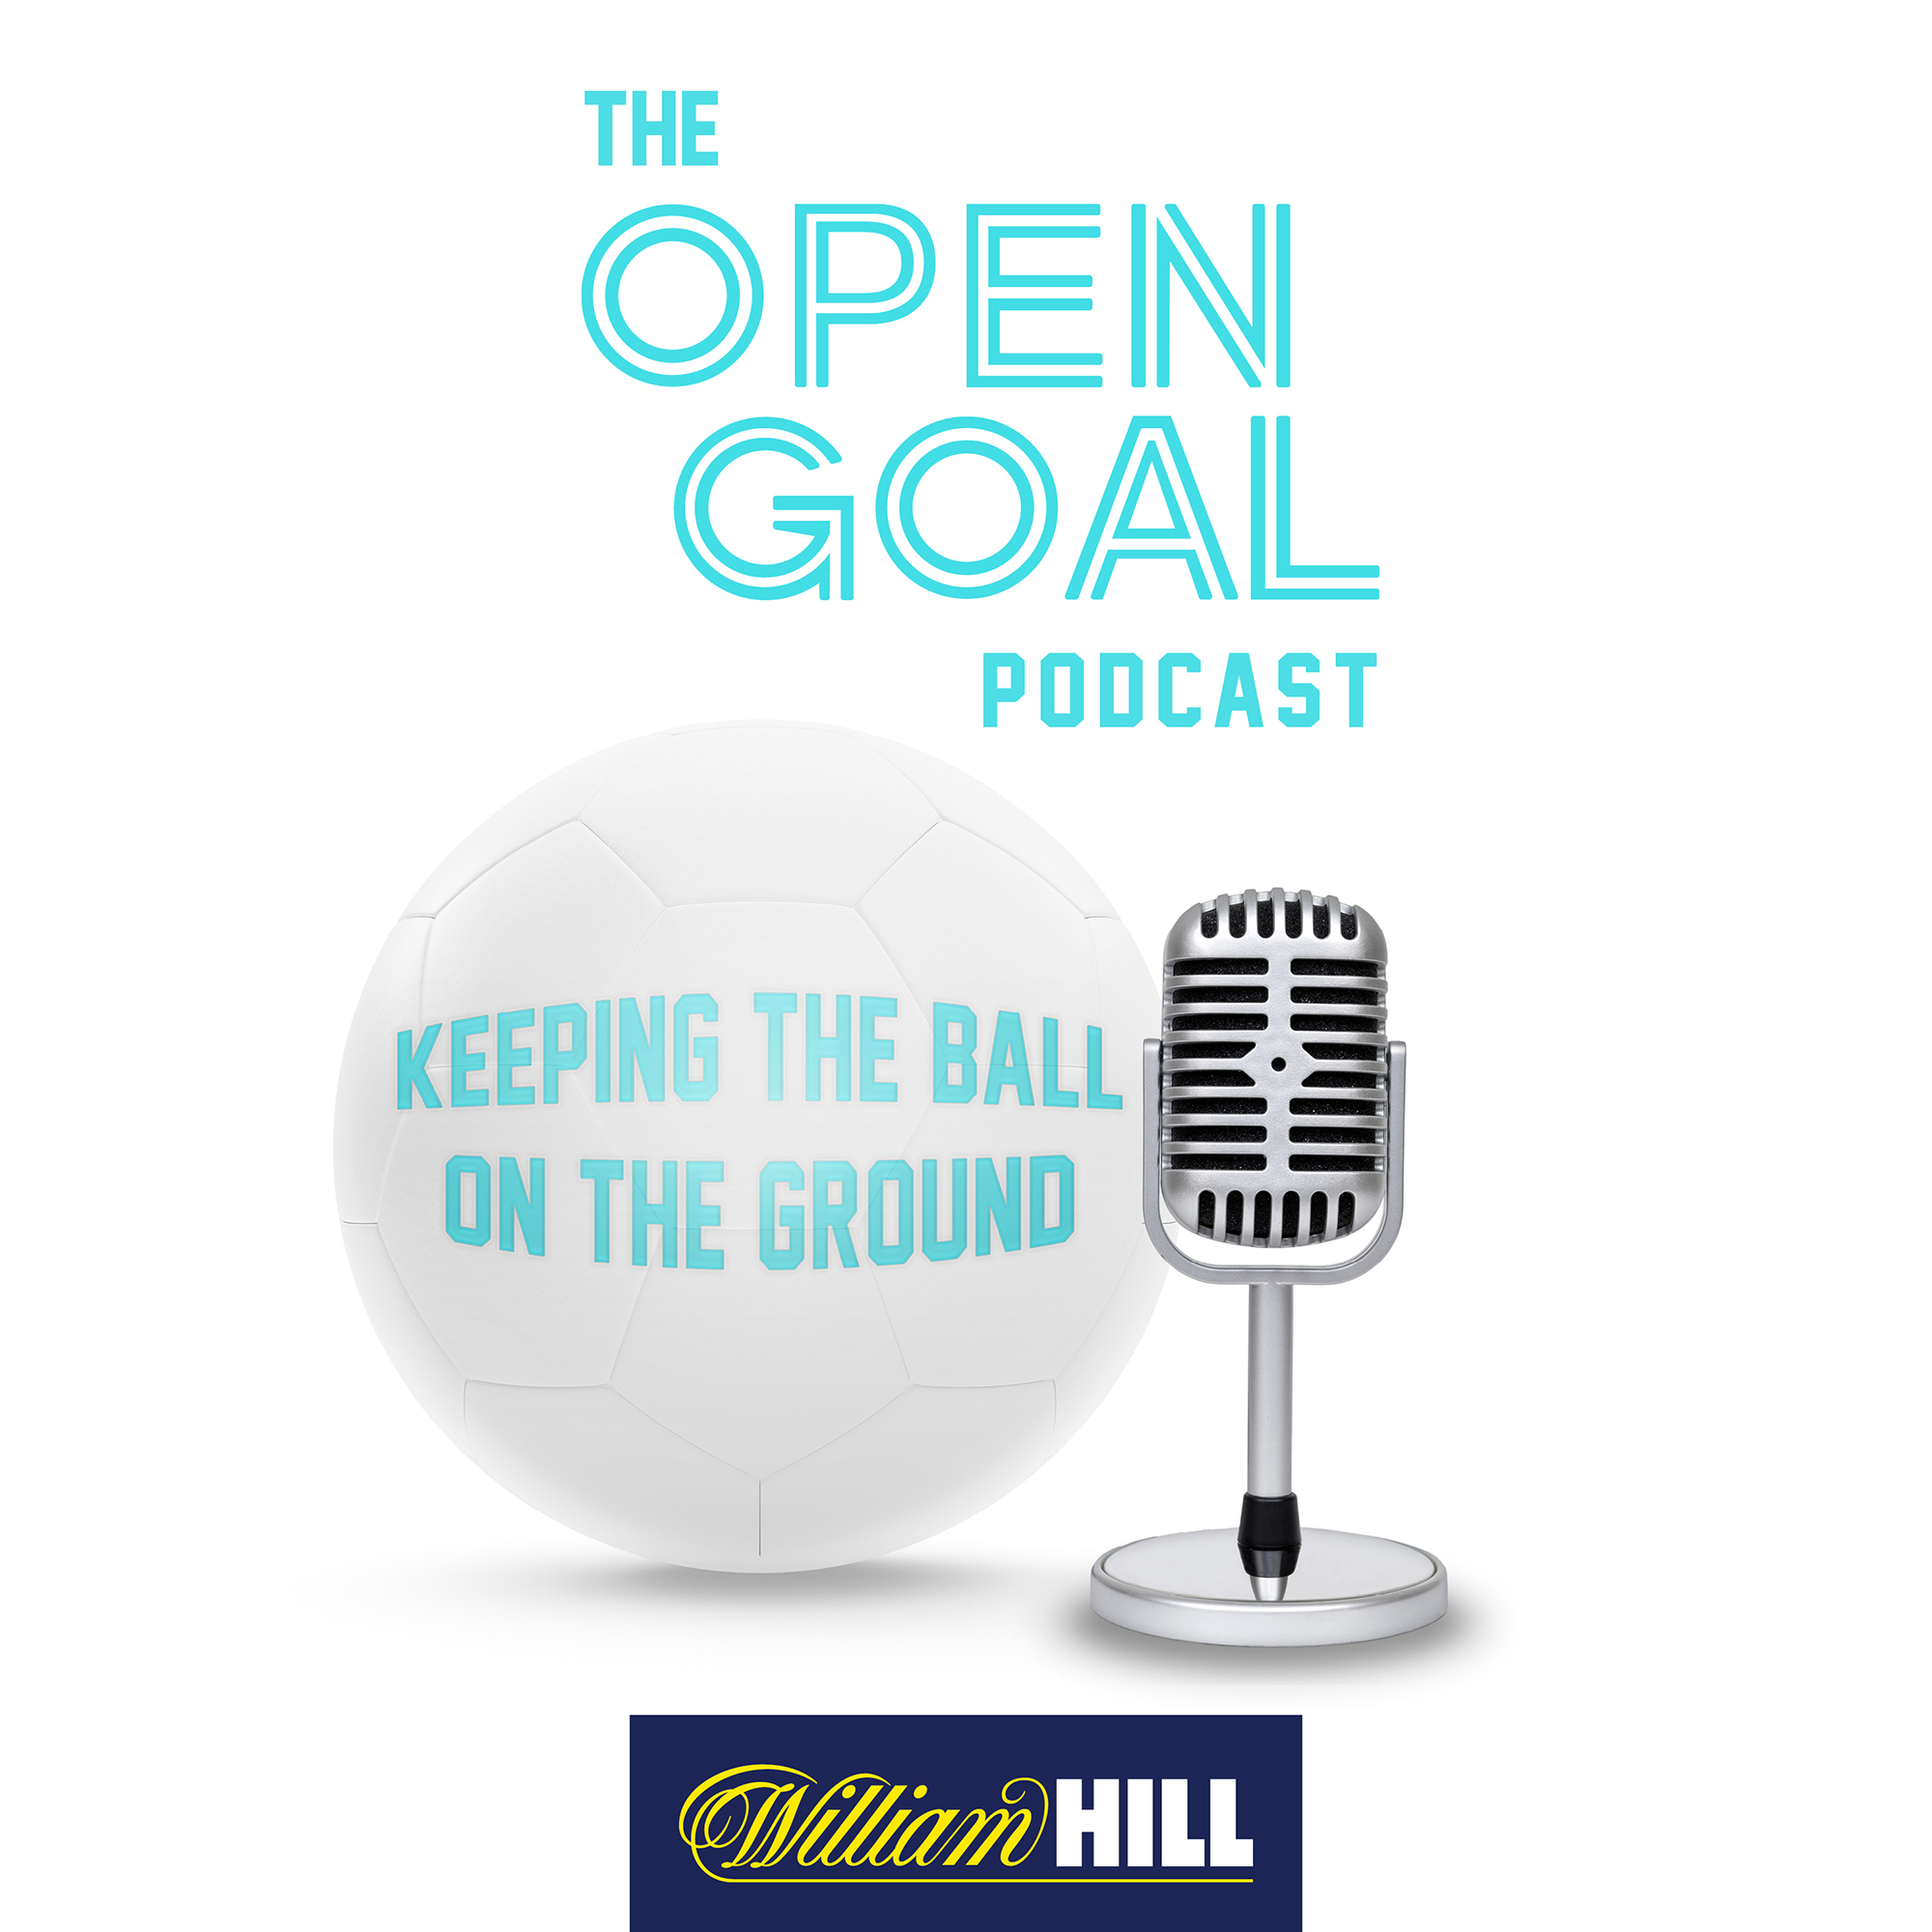 The Open Goal Podcast - Keeping the Ball on the Ground with Gerry McCabe